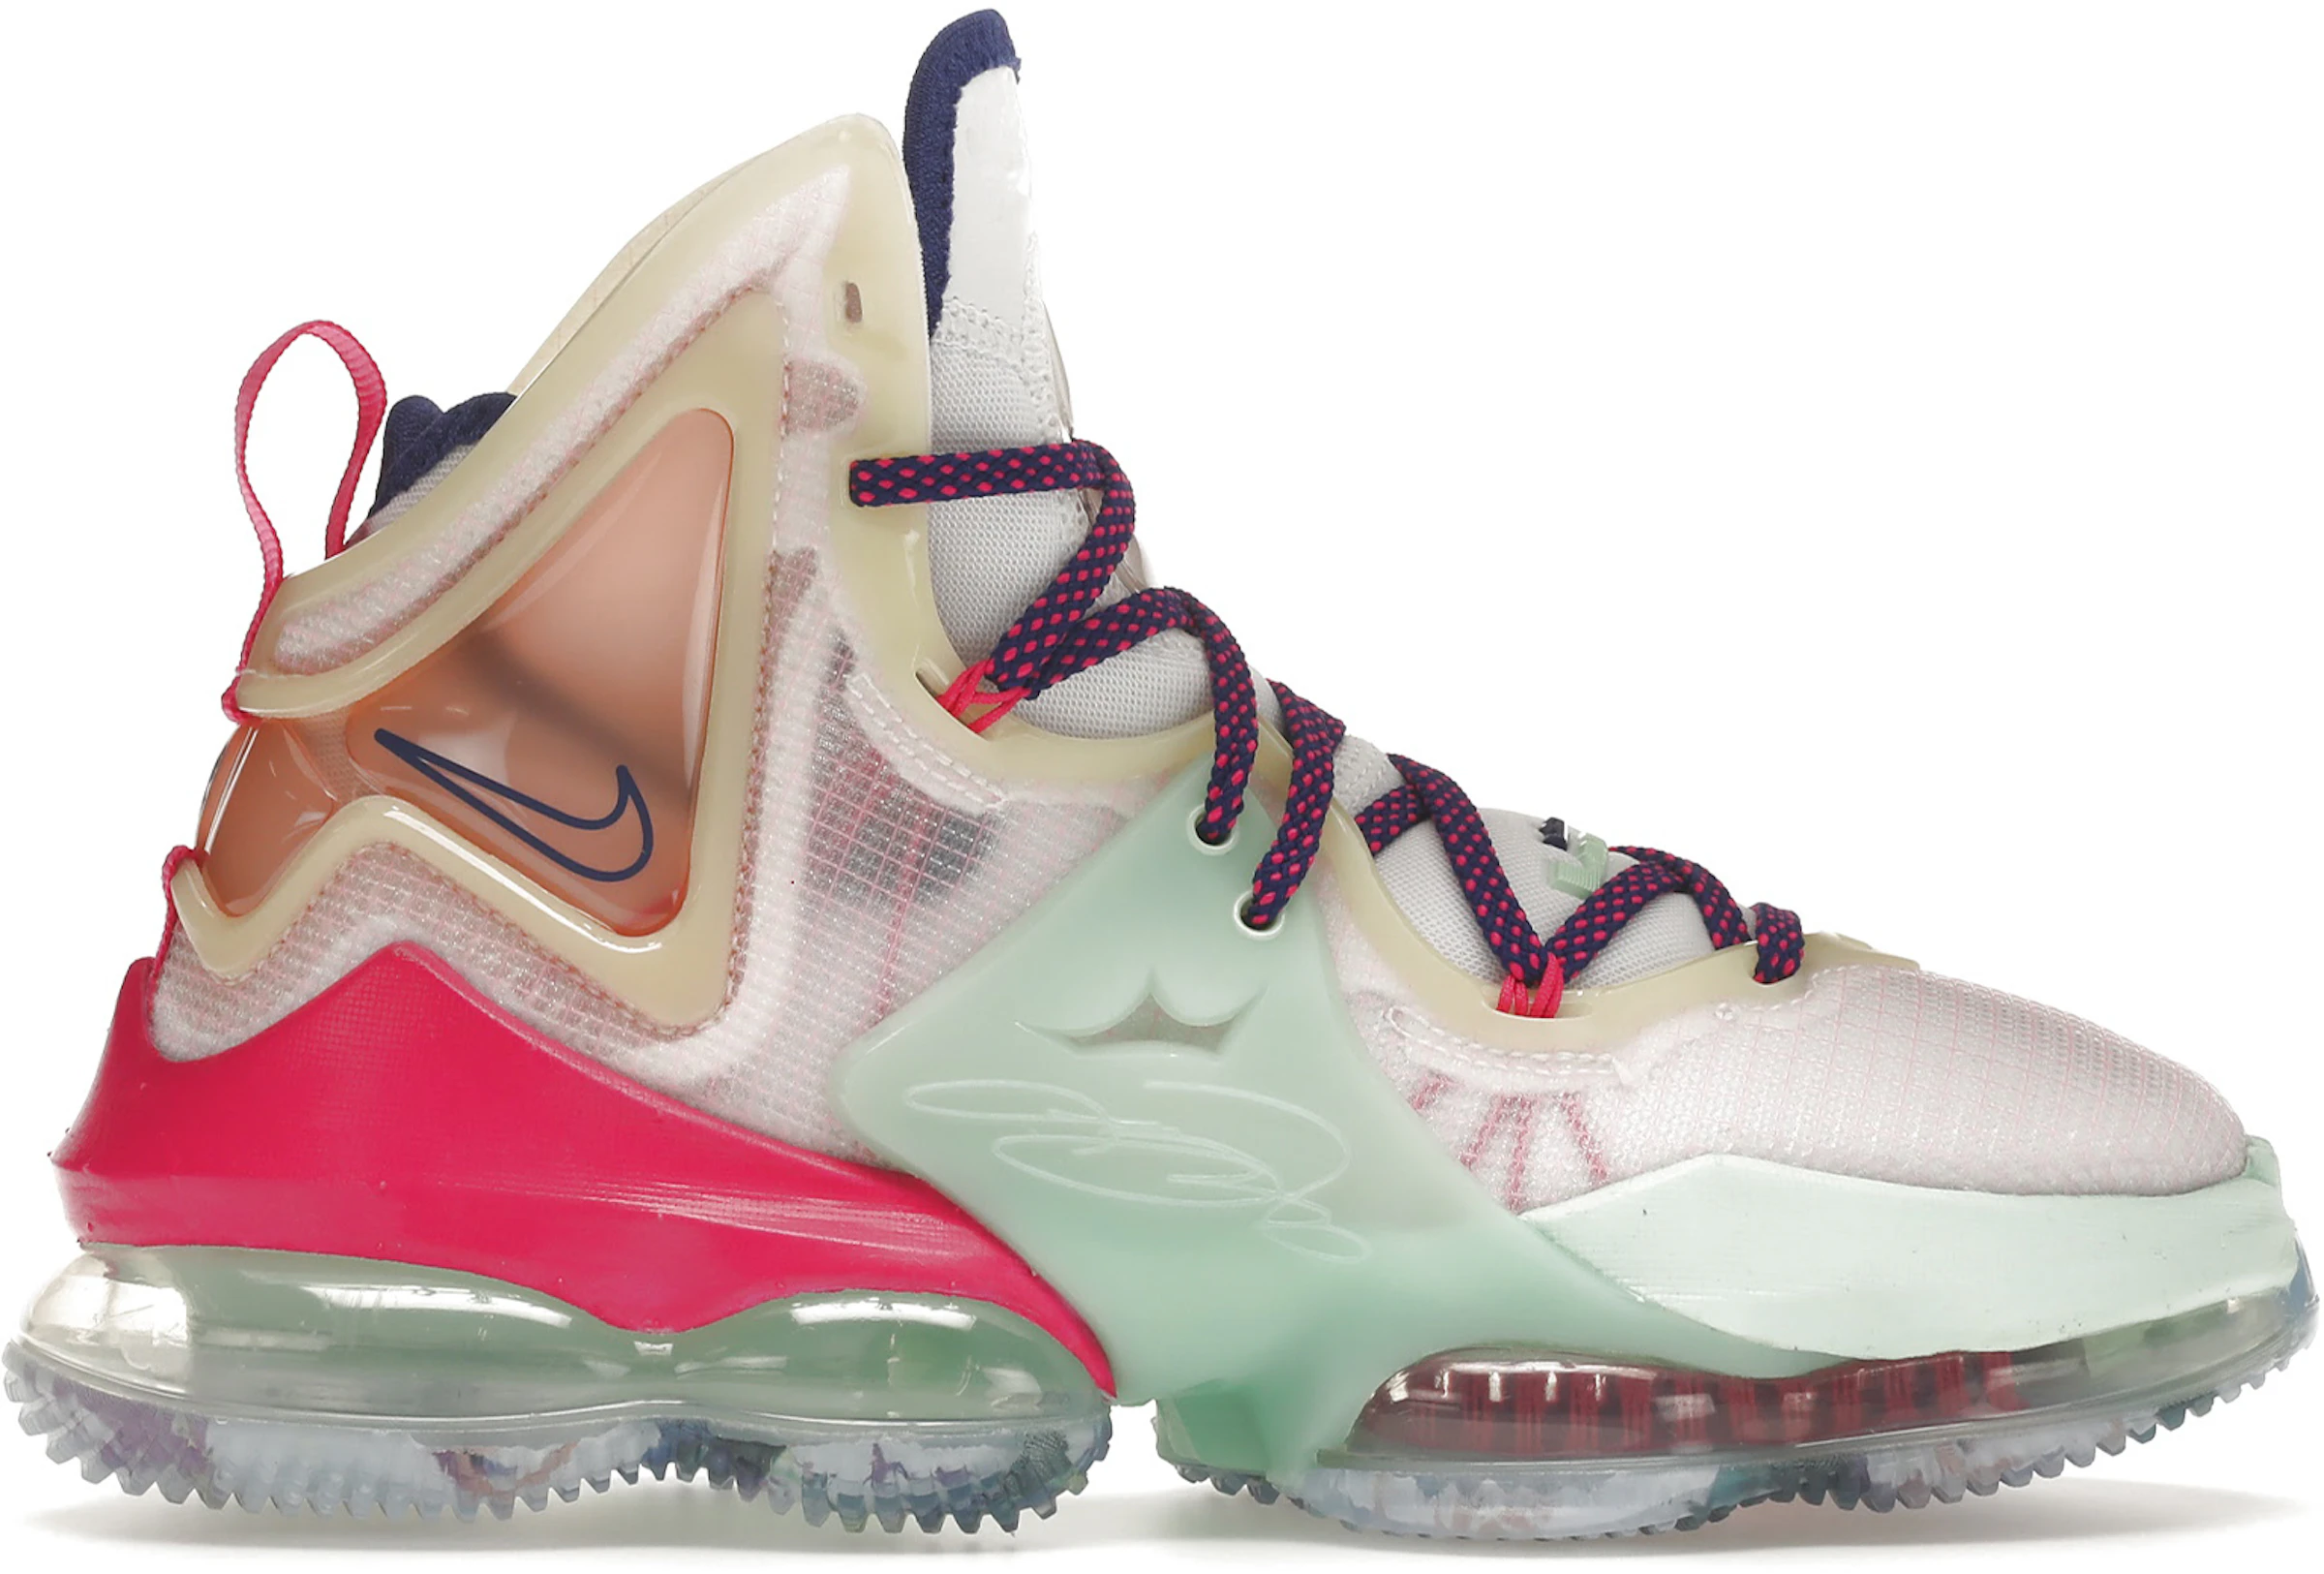 Nike LeBron 19 Valentine's Day Love Letter - DH8460-900/DH8459-900 - US